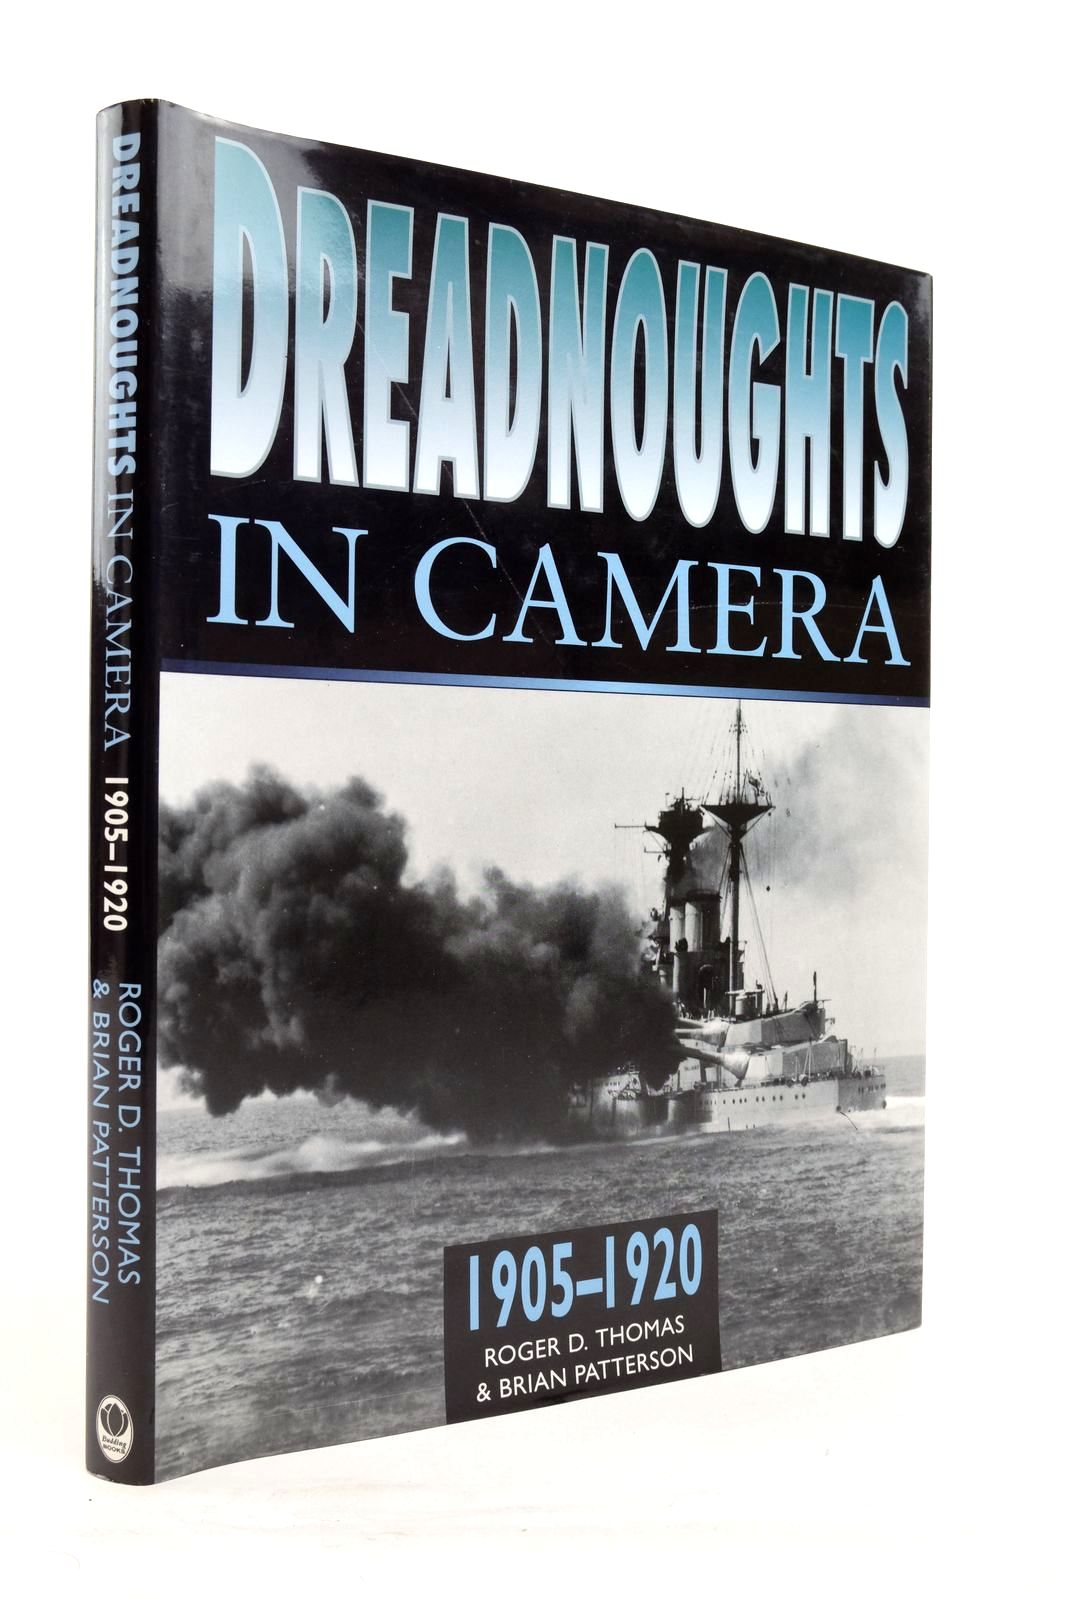 Photo of DREADNOUGHTS IN CAMERA written by Thomas, Roger D. Patterson, Brian published by Budding Books (STOCK CODE: 2137840)  for sale by Stella & Rose's Books